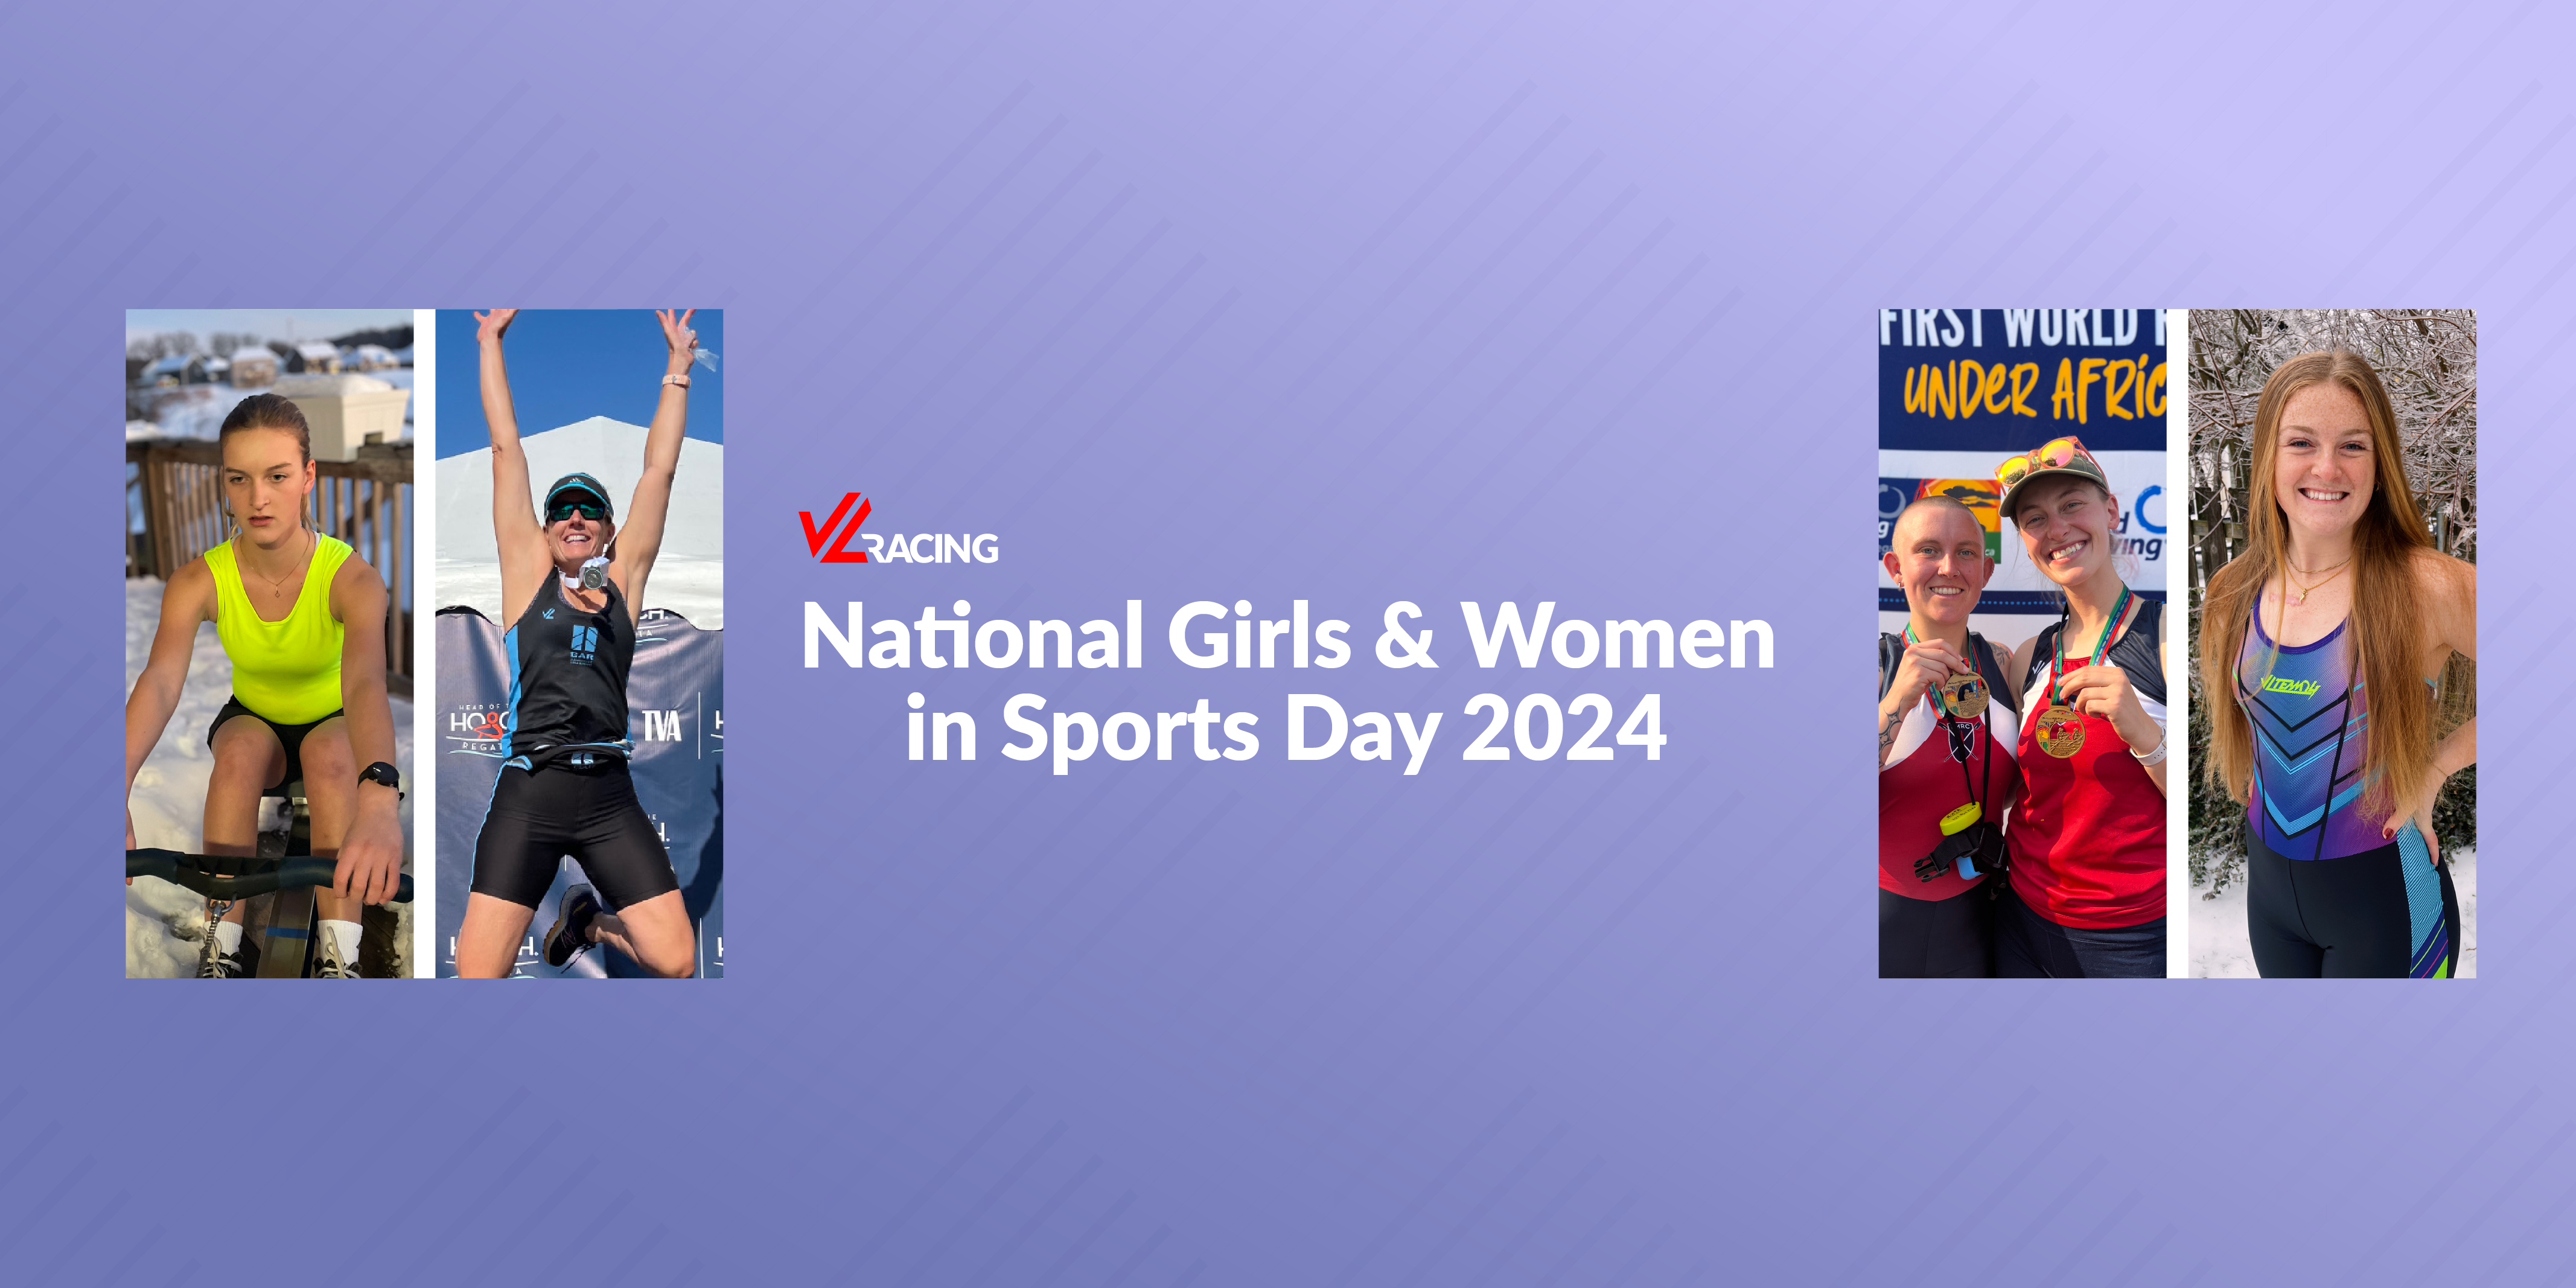 Women's Sports Foundation Celebrates National Girls & Women in Sports Day  While Commemorating the 50th Anniversary of Title IX - Women's Sports  Foundation